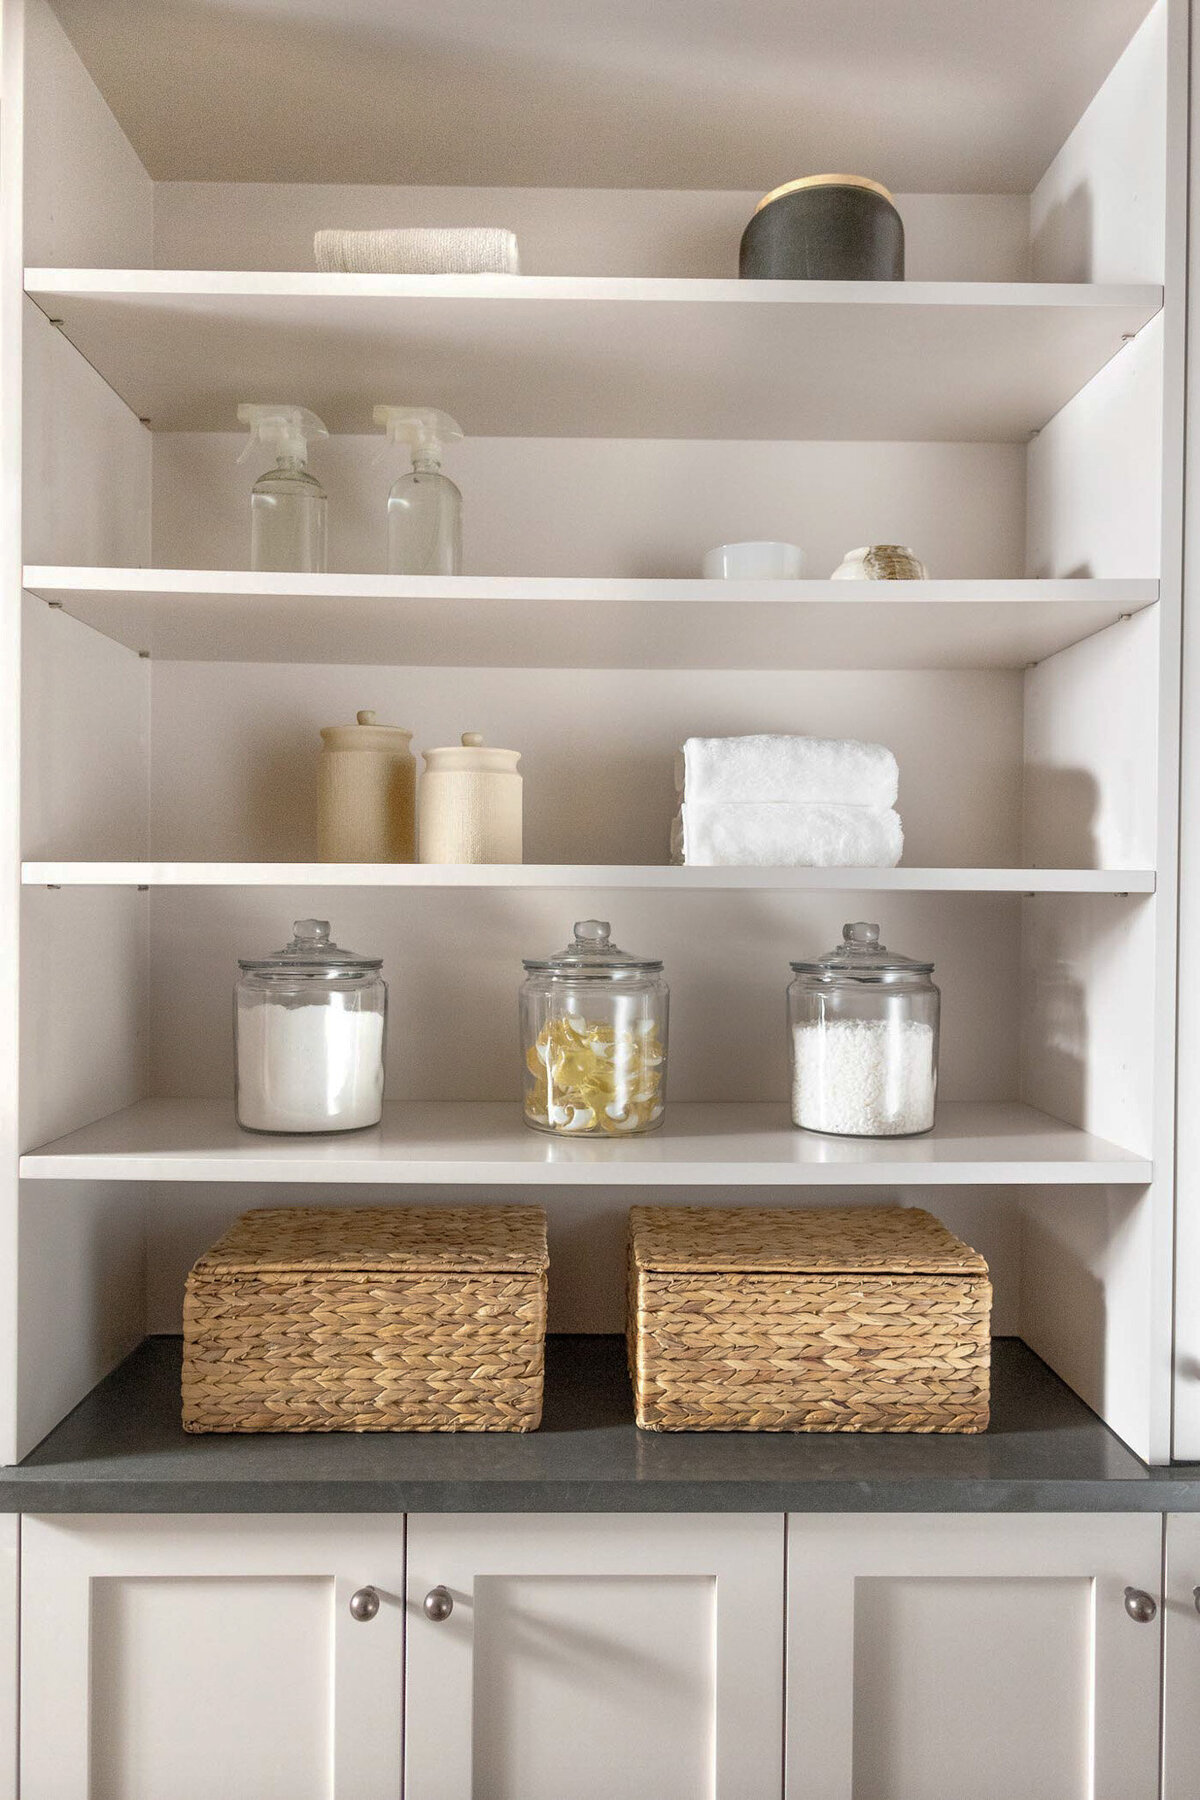 Beige cabinet with doors with antique bronze knobs. Grey quartz countertops above with open shelving painted beige. Shelves adorned with glass jars of laundry detergent and pods, cleaning spray bottles, towels, jars, and wicker baskets.